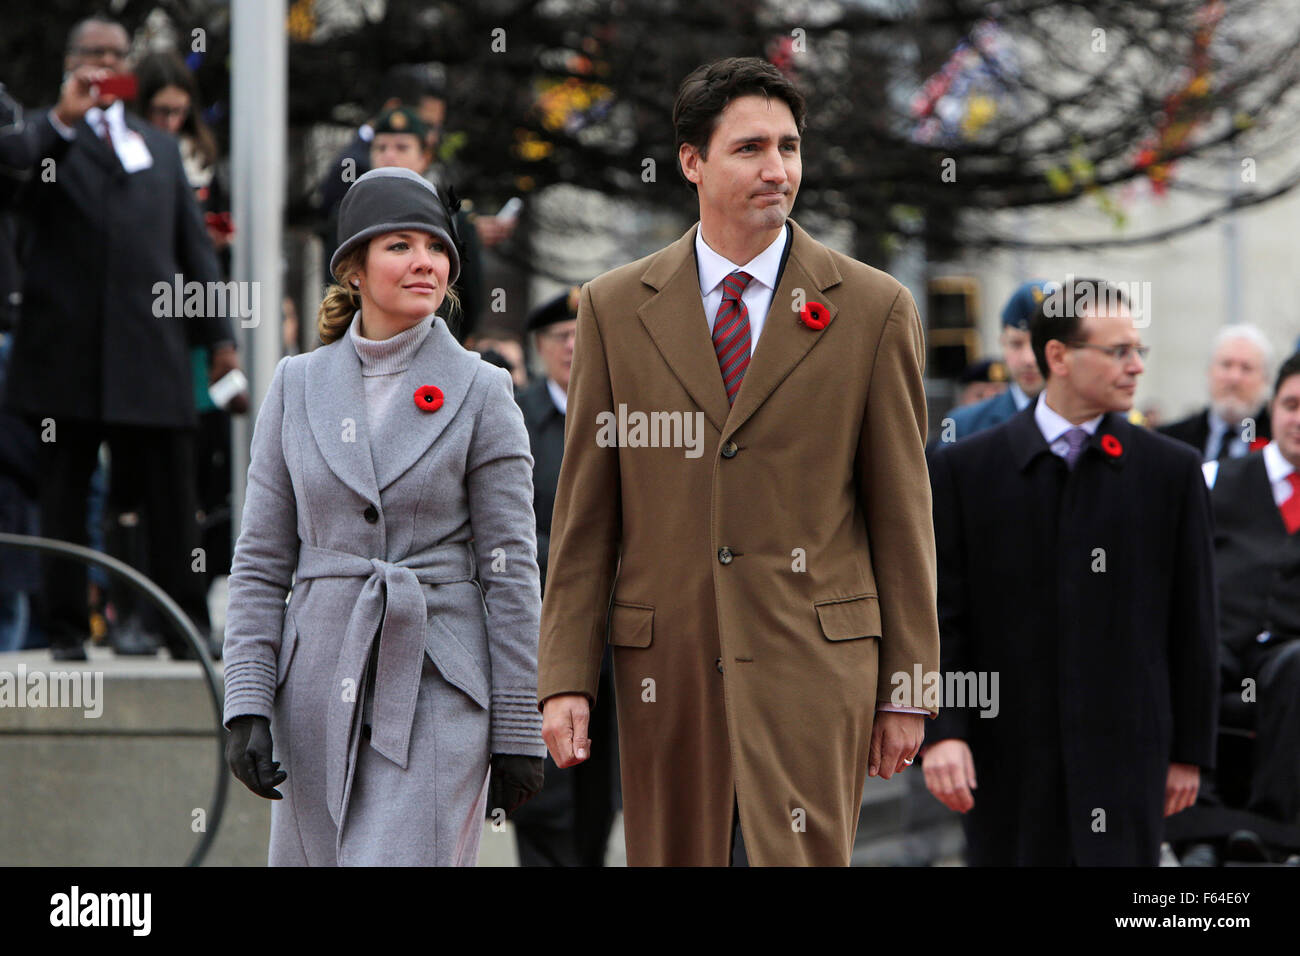 Ottawa, Canada. 11th Nov, 2015. Canada's Prime Minister Justin Trudeau and wife Sophie arrive at the annual Remembrance Day ceremony at the National War Memorial in Ottawa, Canada, on Nov. 11, 2015. Every year on Nov. 11, Canadians reflect honour their war veterans and fallen soldiers by wearing a poppy and observing a moment of silence on the 11th minute of the 11th hour. Credit:  David Kawai/Xinhua/Alamy Live News Stock Photo